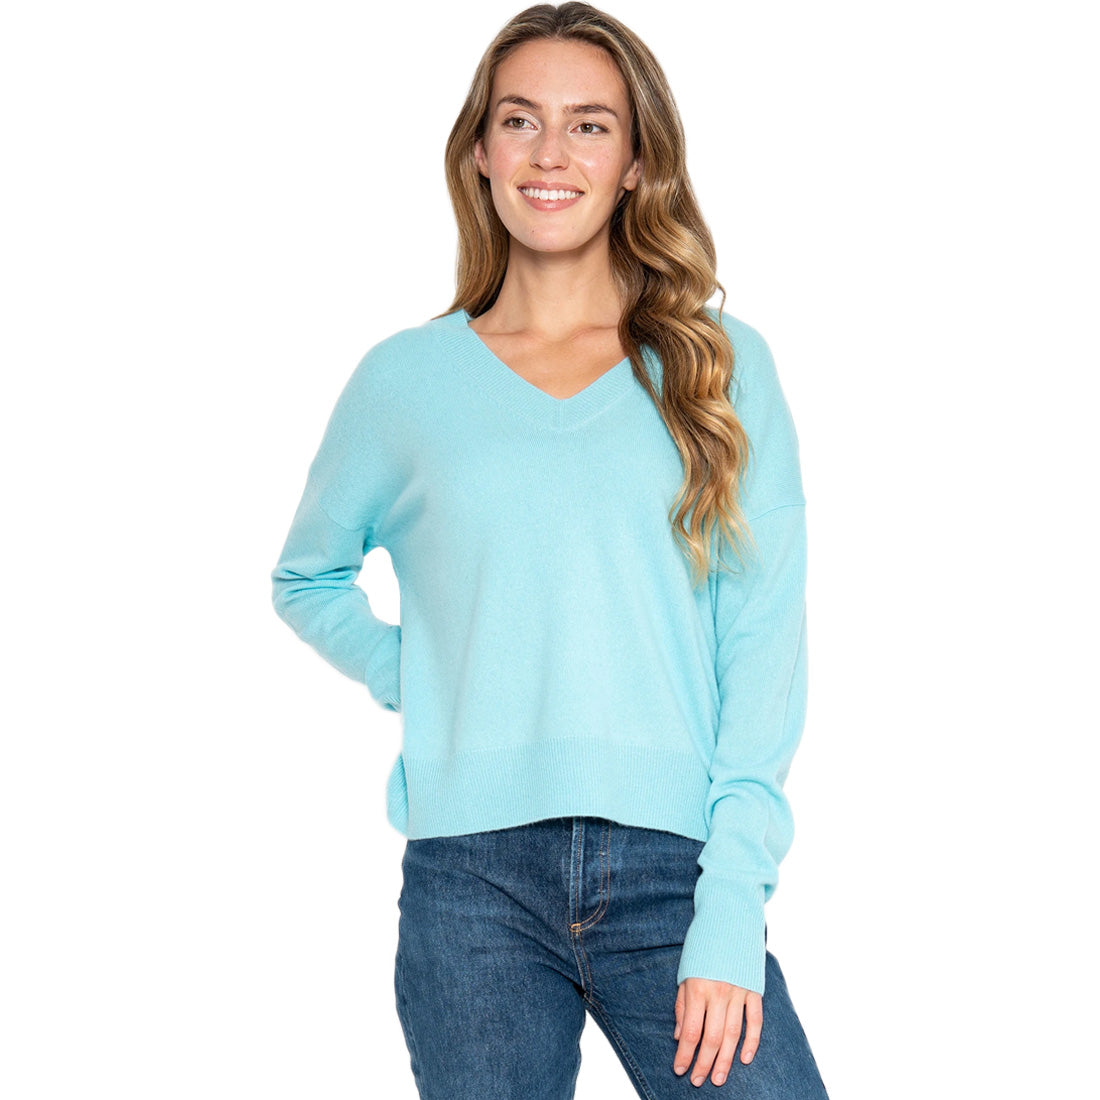 One Grey Day Spencer Cashmere Sweater - Women's